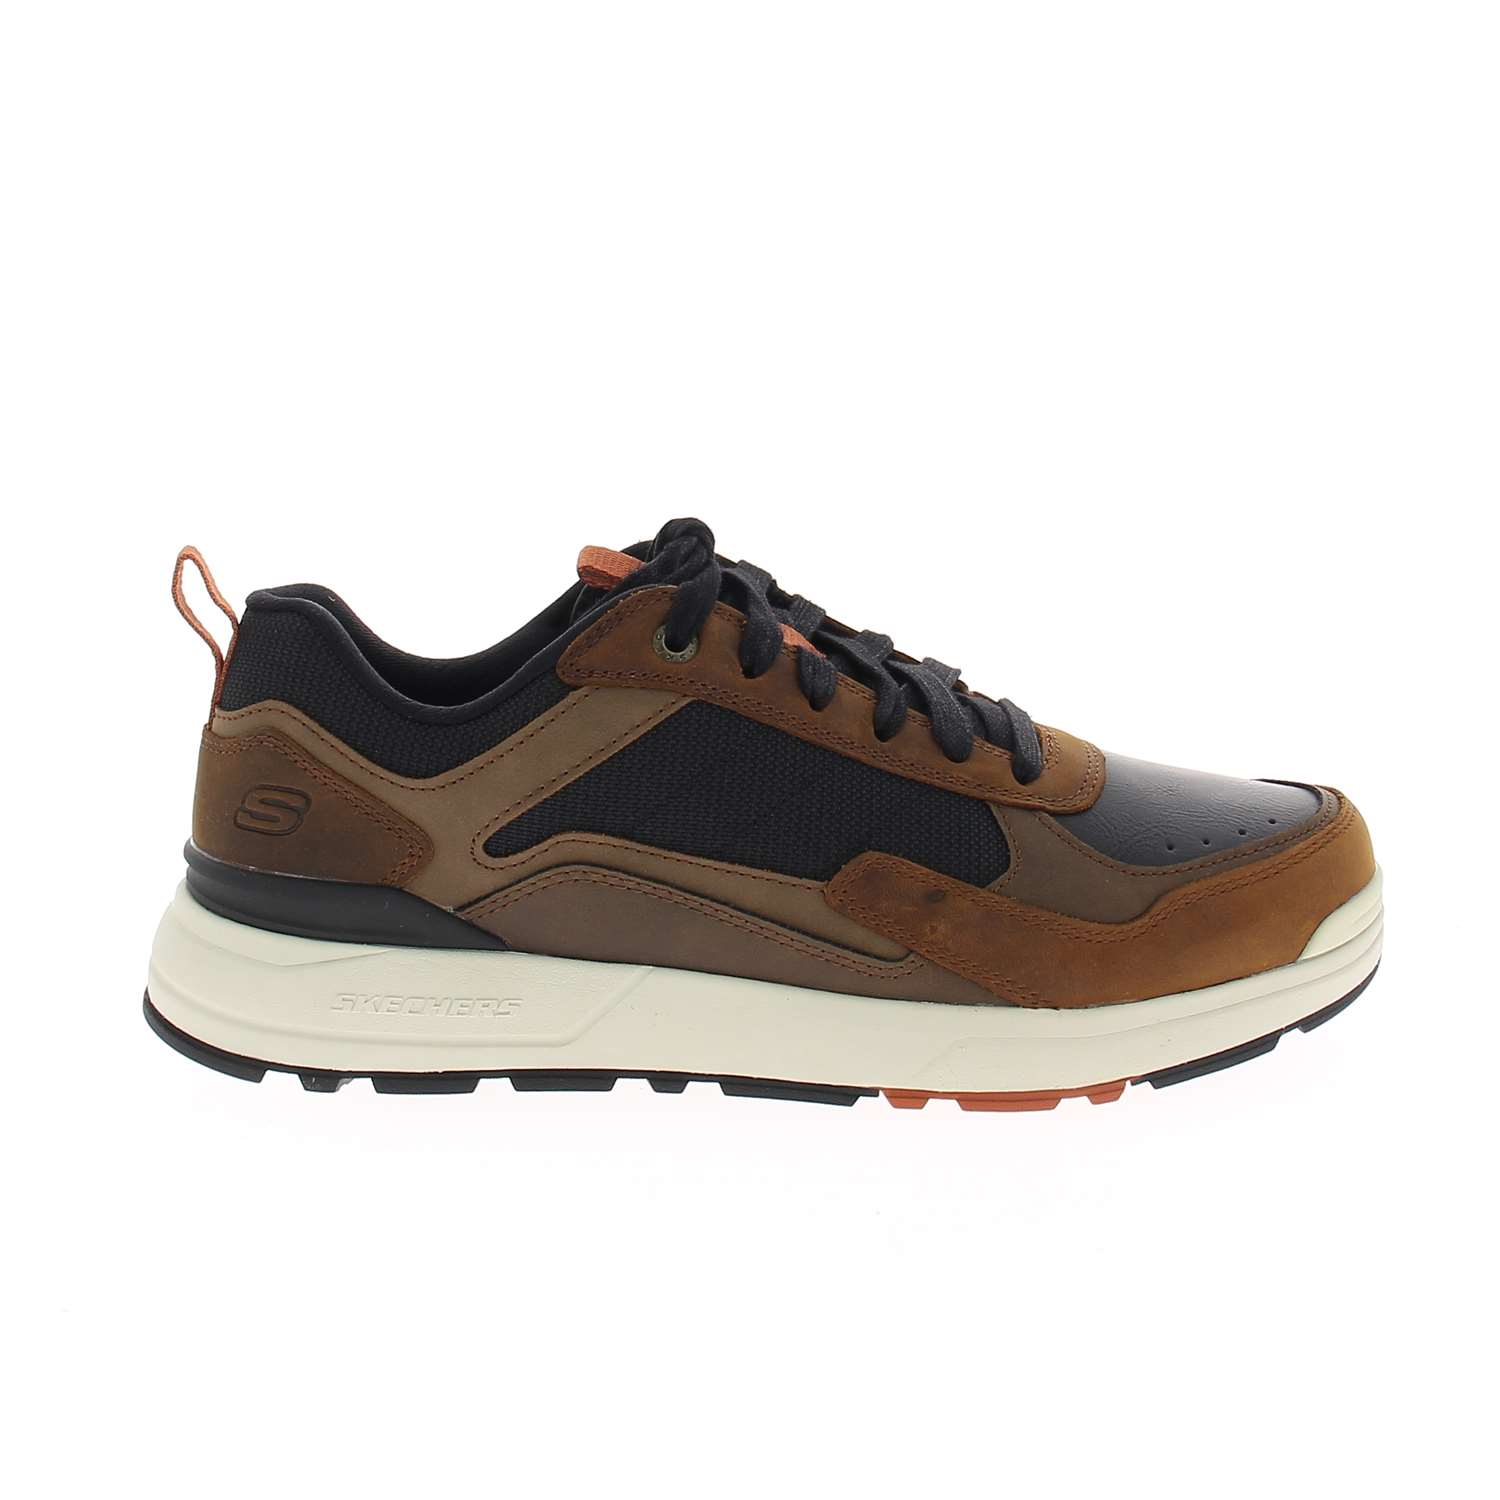 02 - ROZIER RELAXED FIT - SKECHERS - Chaussures à lacets - Nubuck